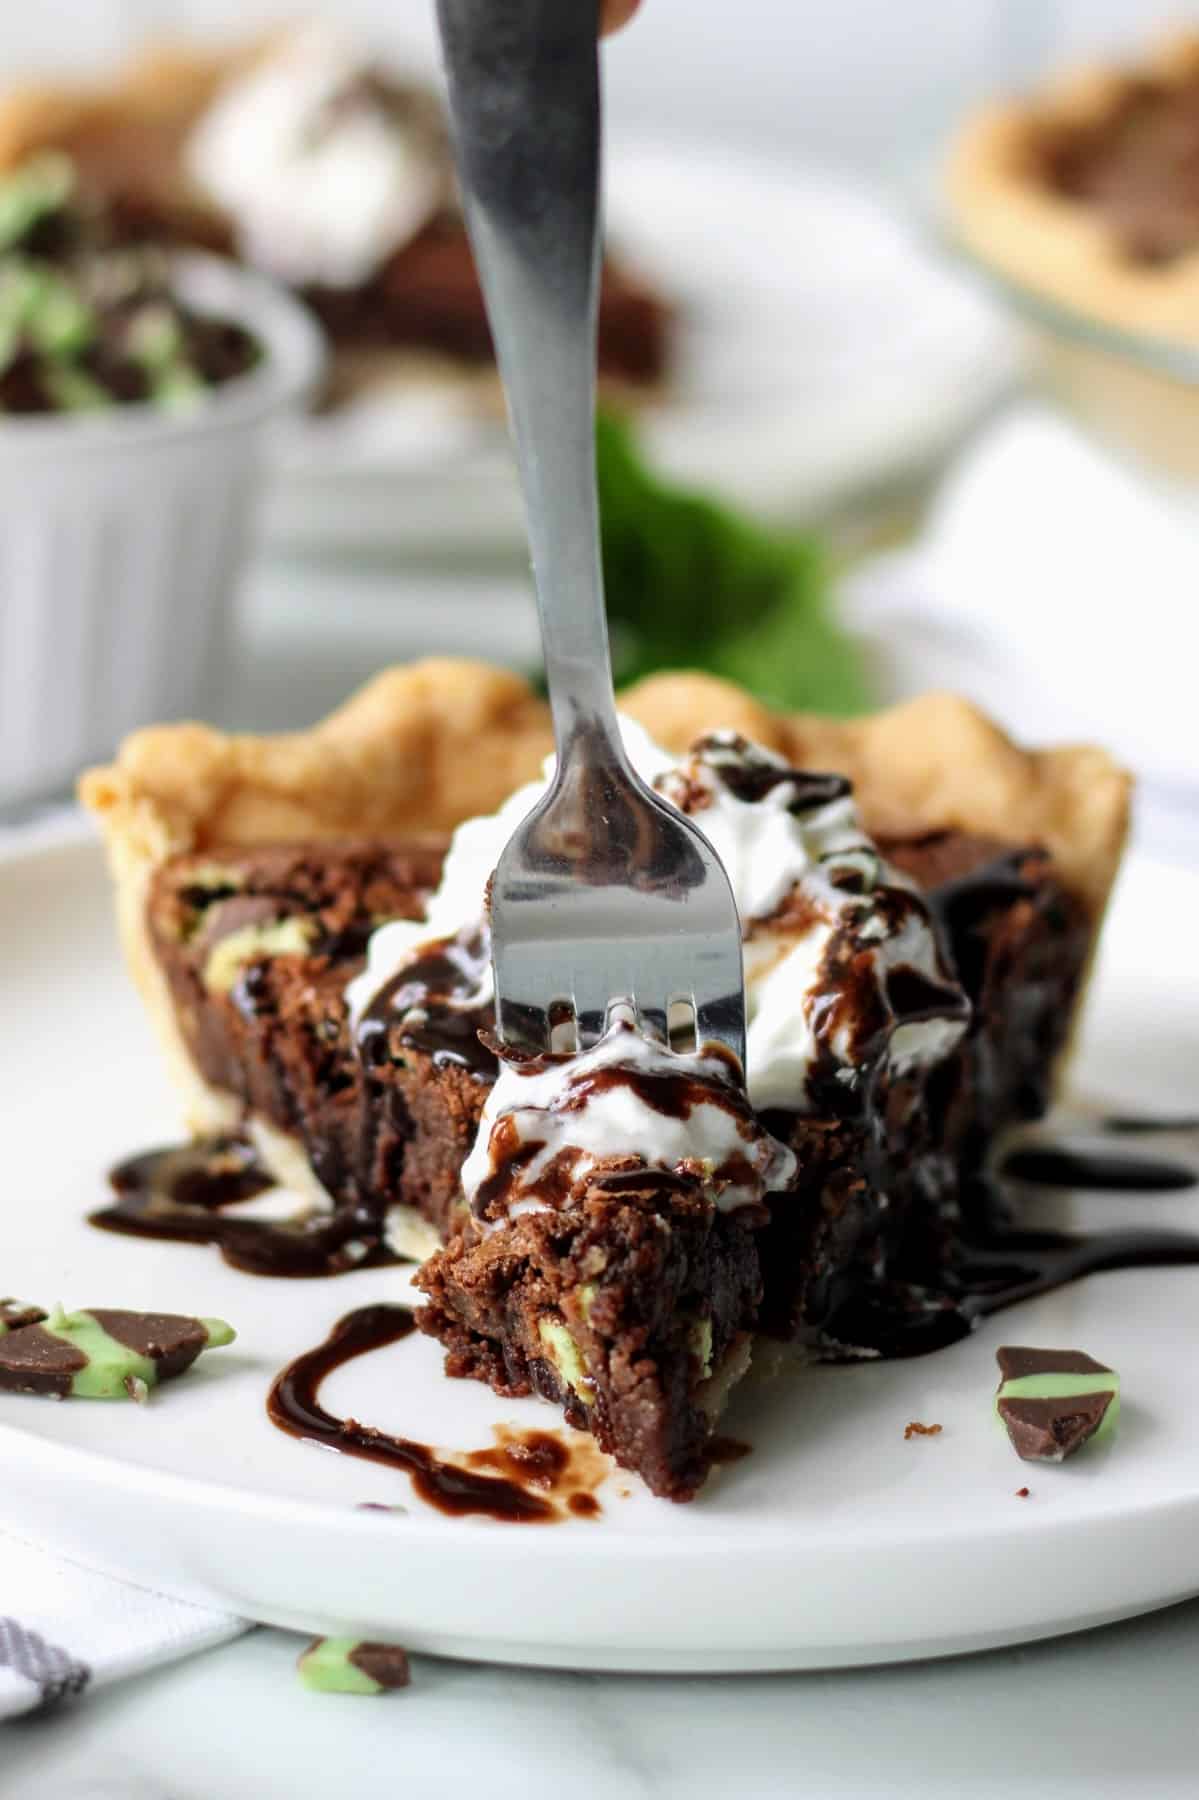 Putting a fork into a slice of pie. 